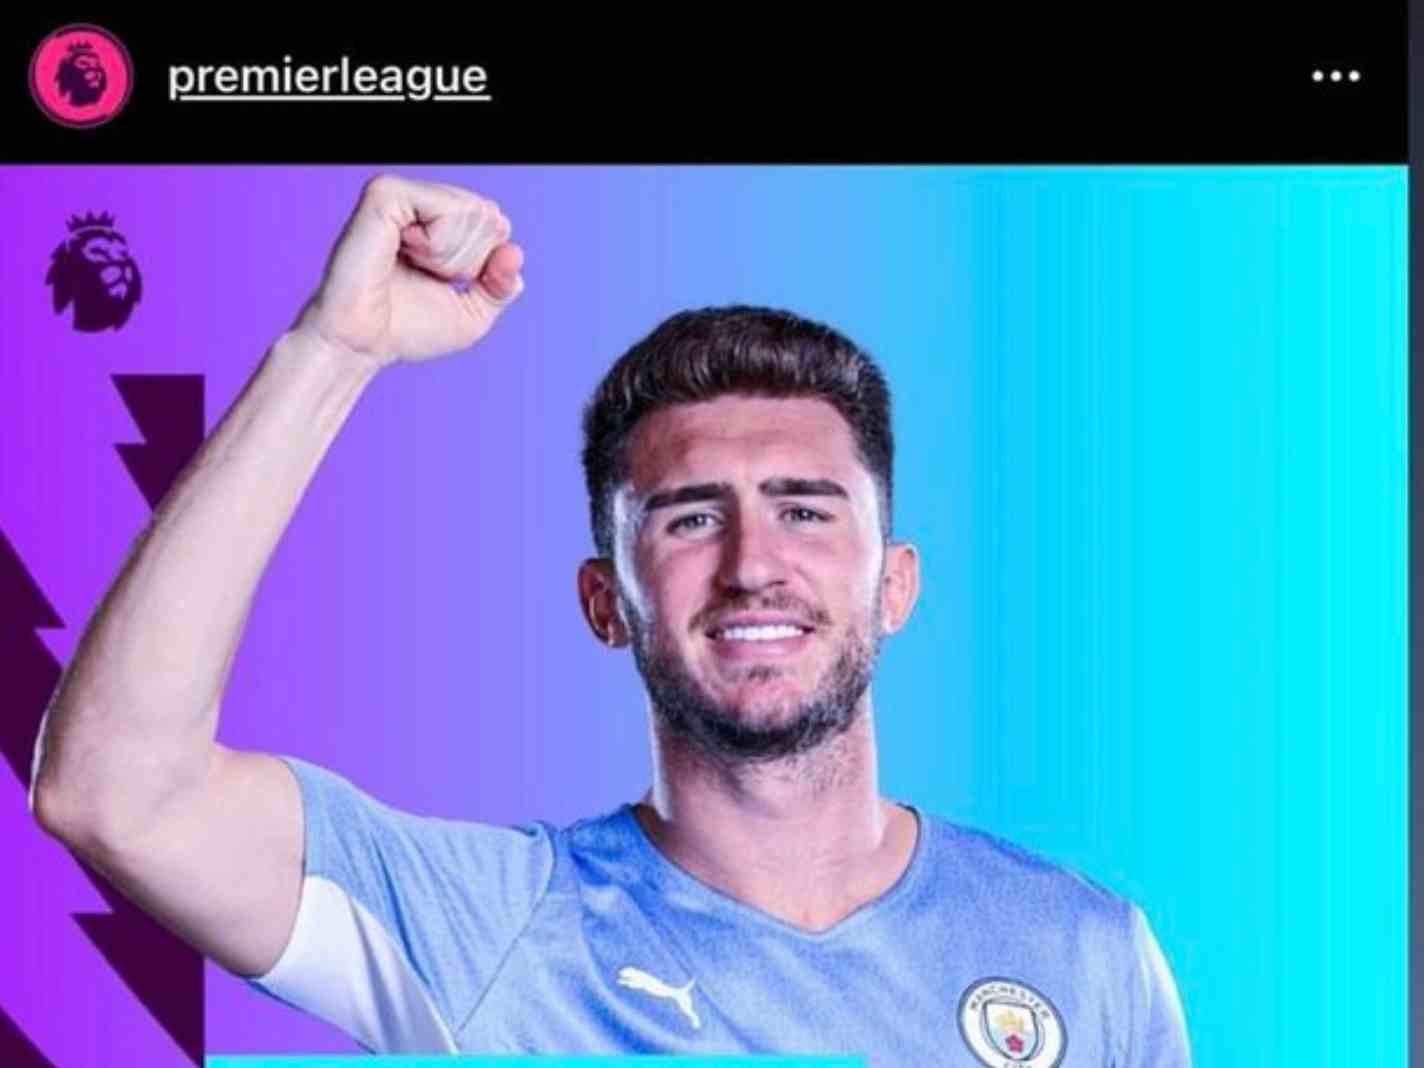 A screenshot of Aymeric Laporte's Instagram story showing his stats.